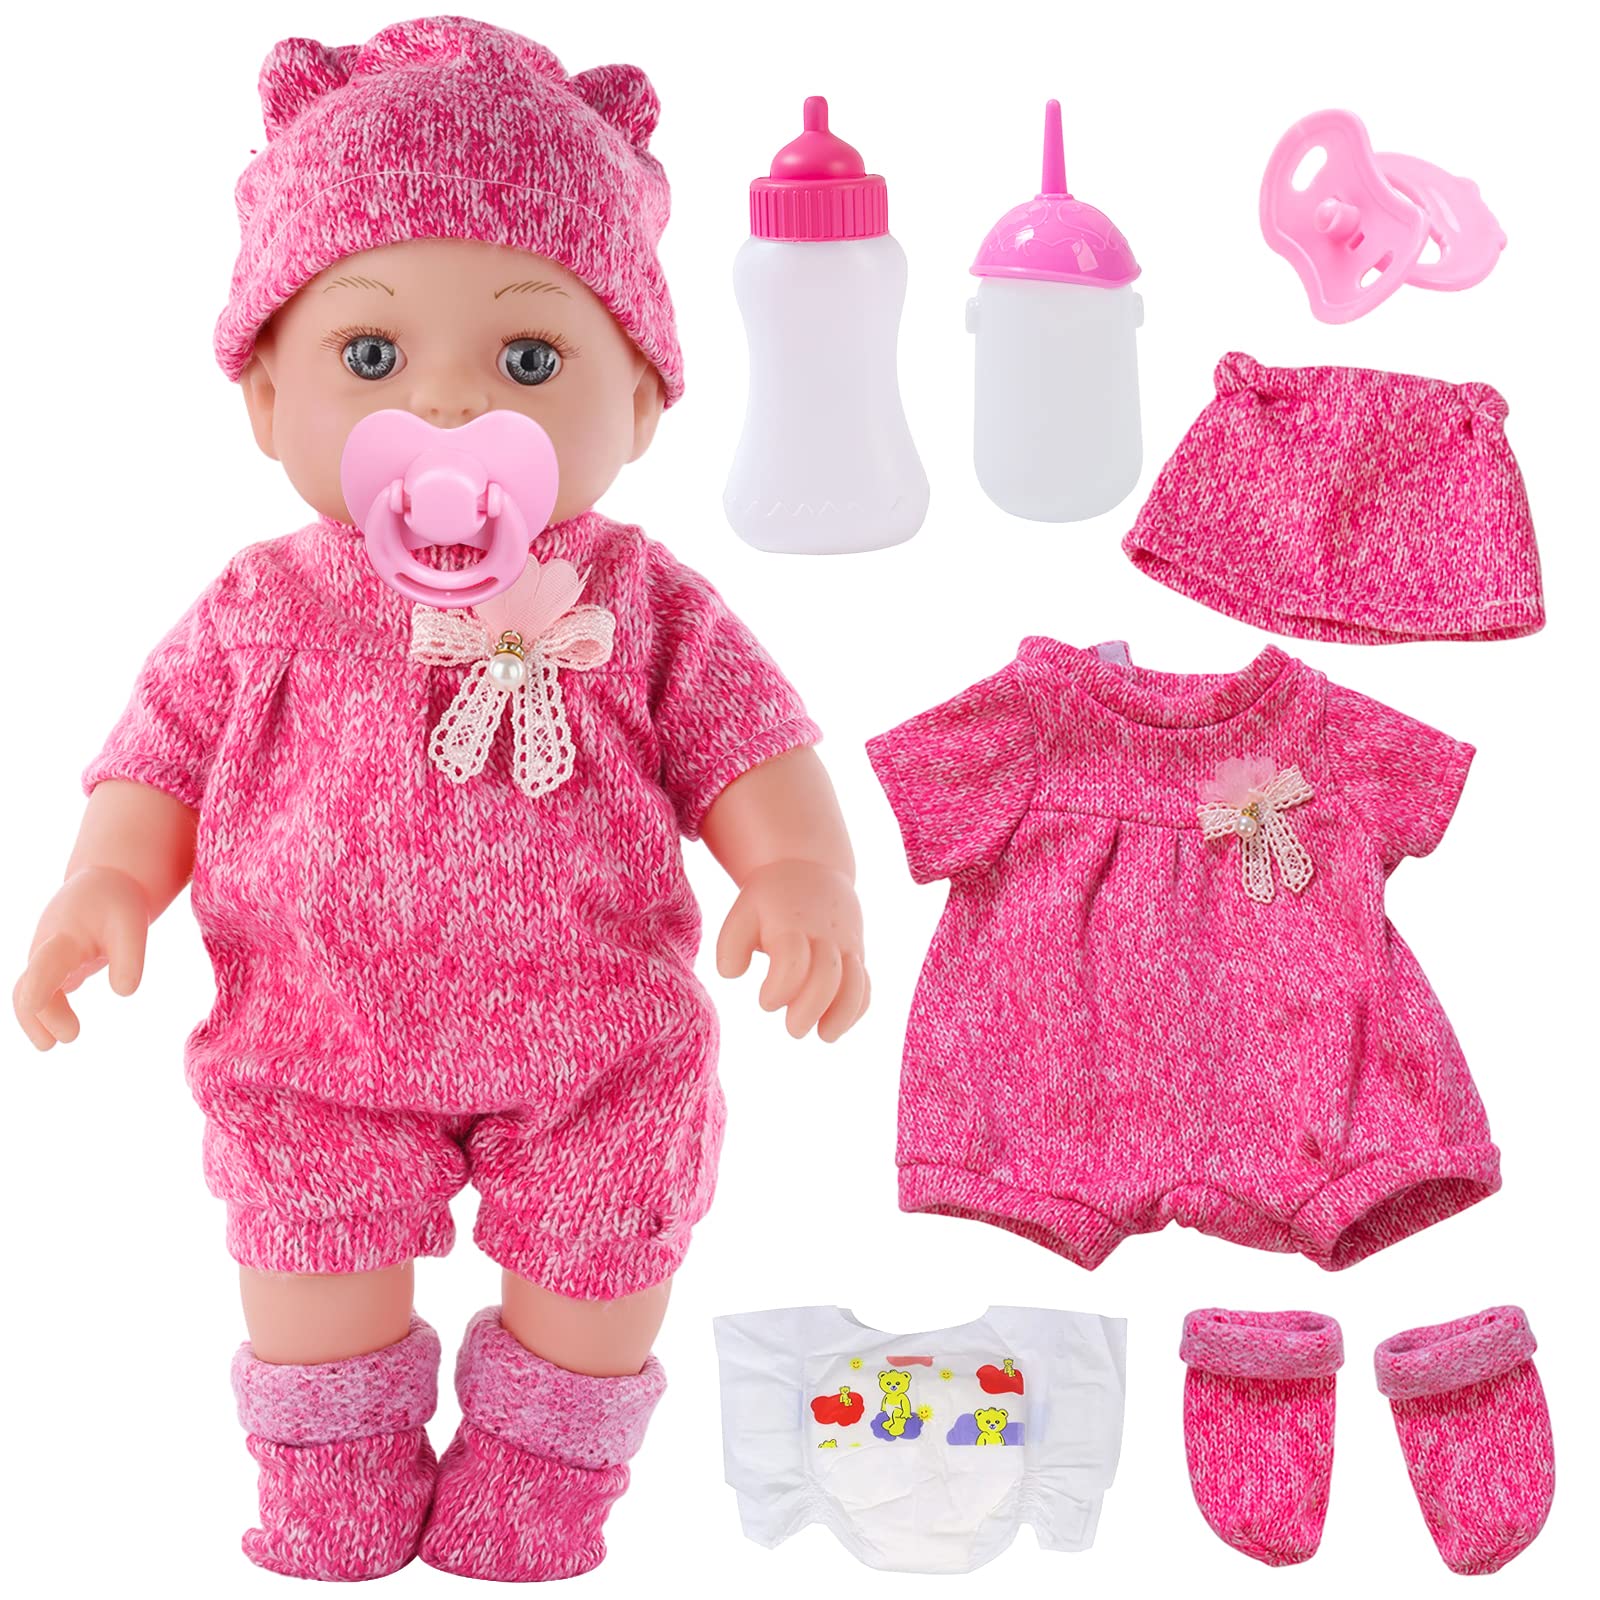 DONTNO 12 Inch Baby Doll with Clothes and Accessories, Reborn Alive ...